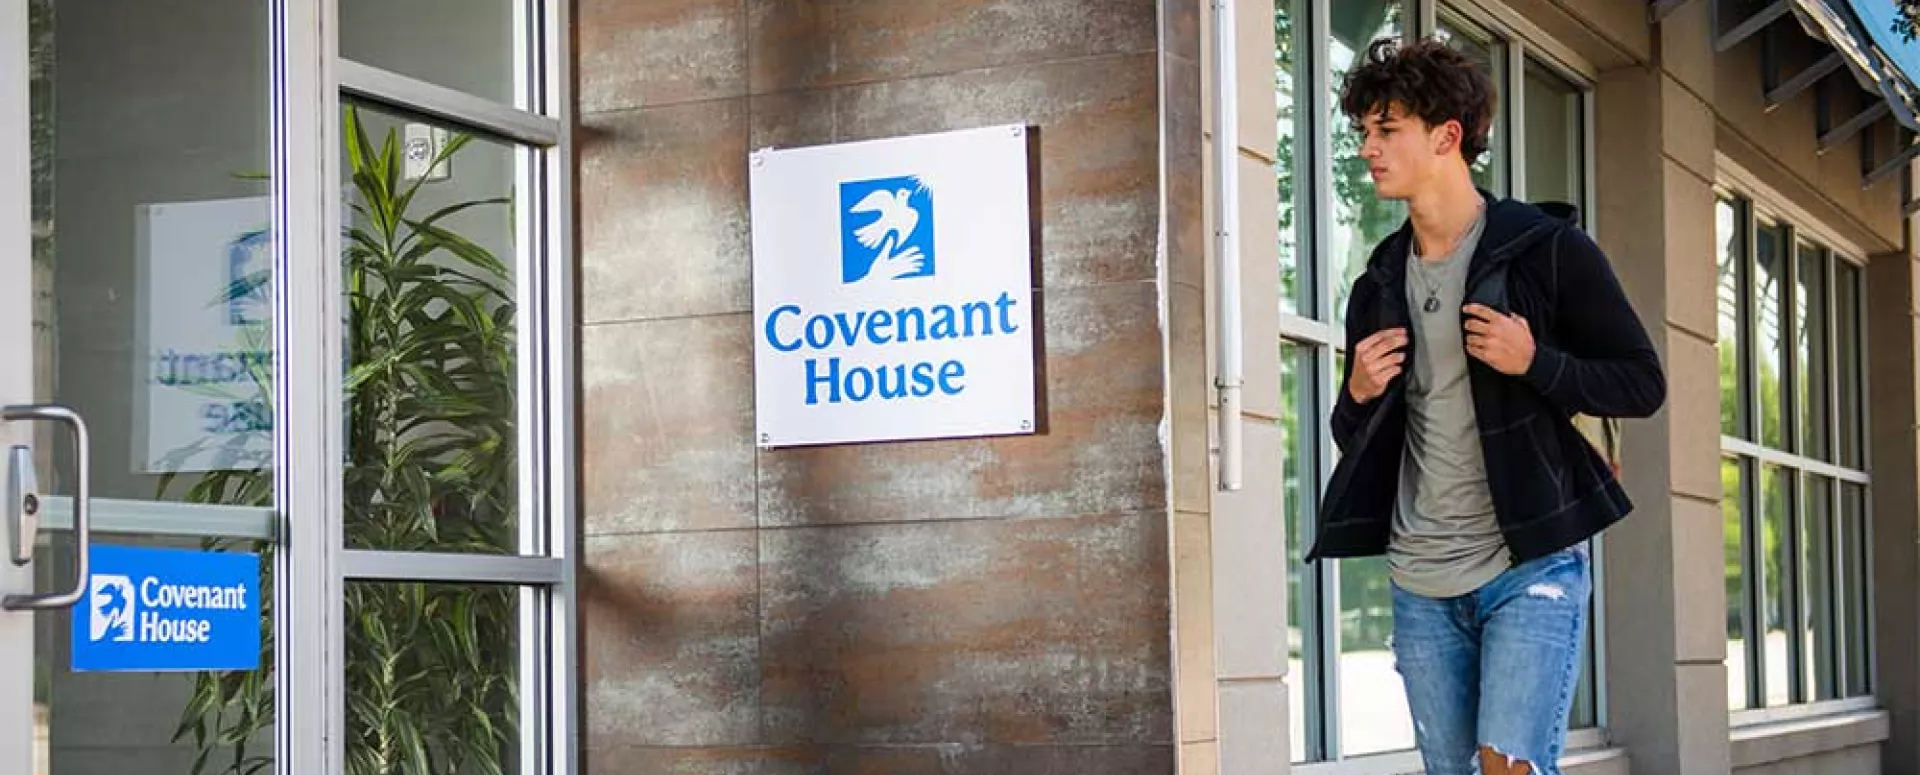 former homeless youth entering Covenant House | Youth Homelessness